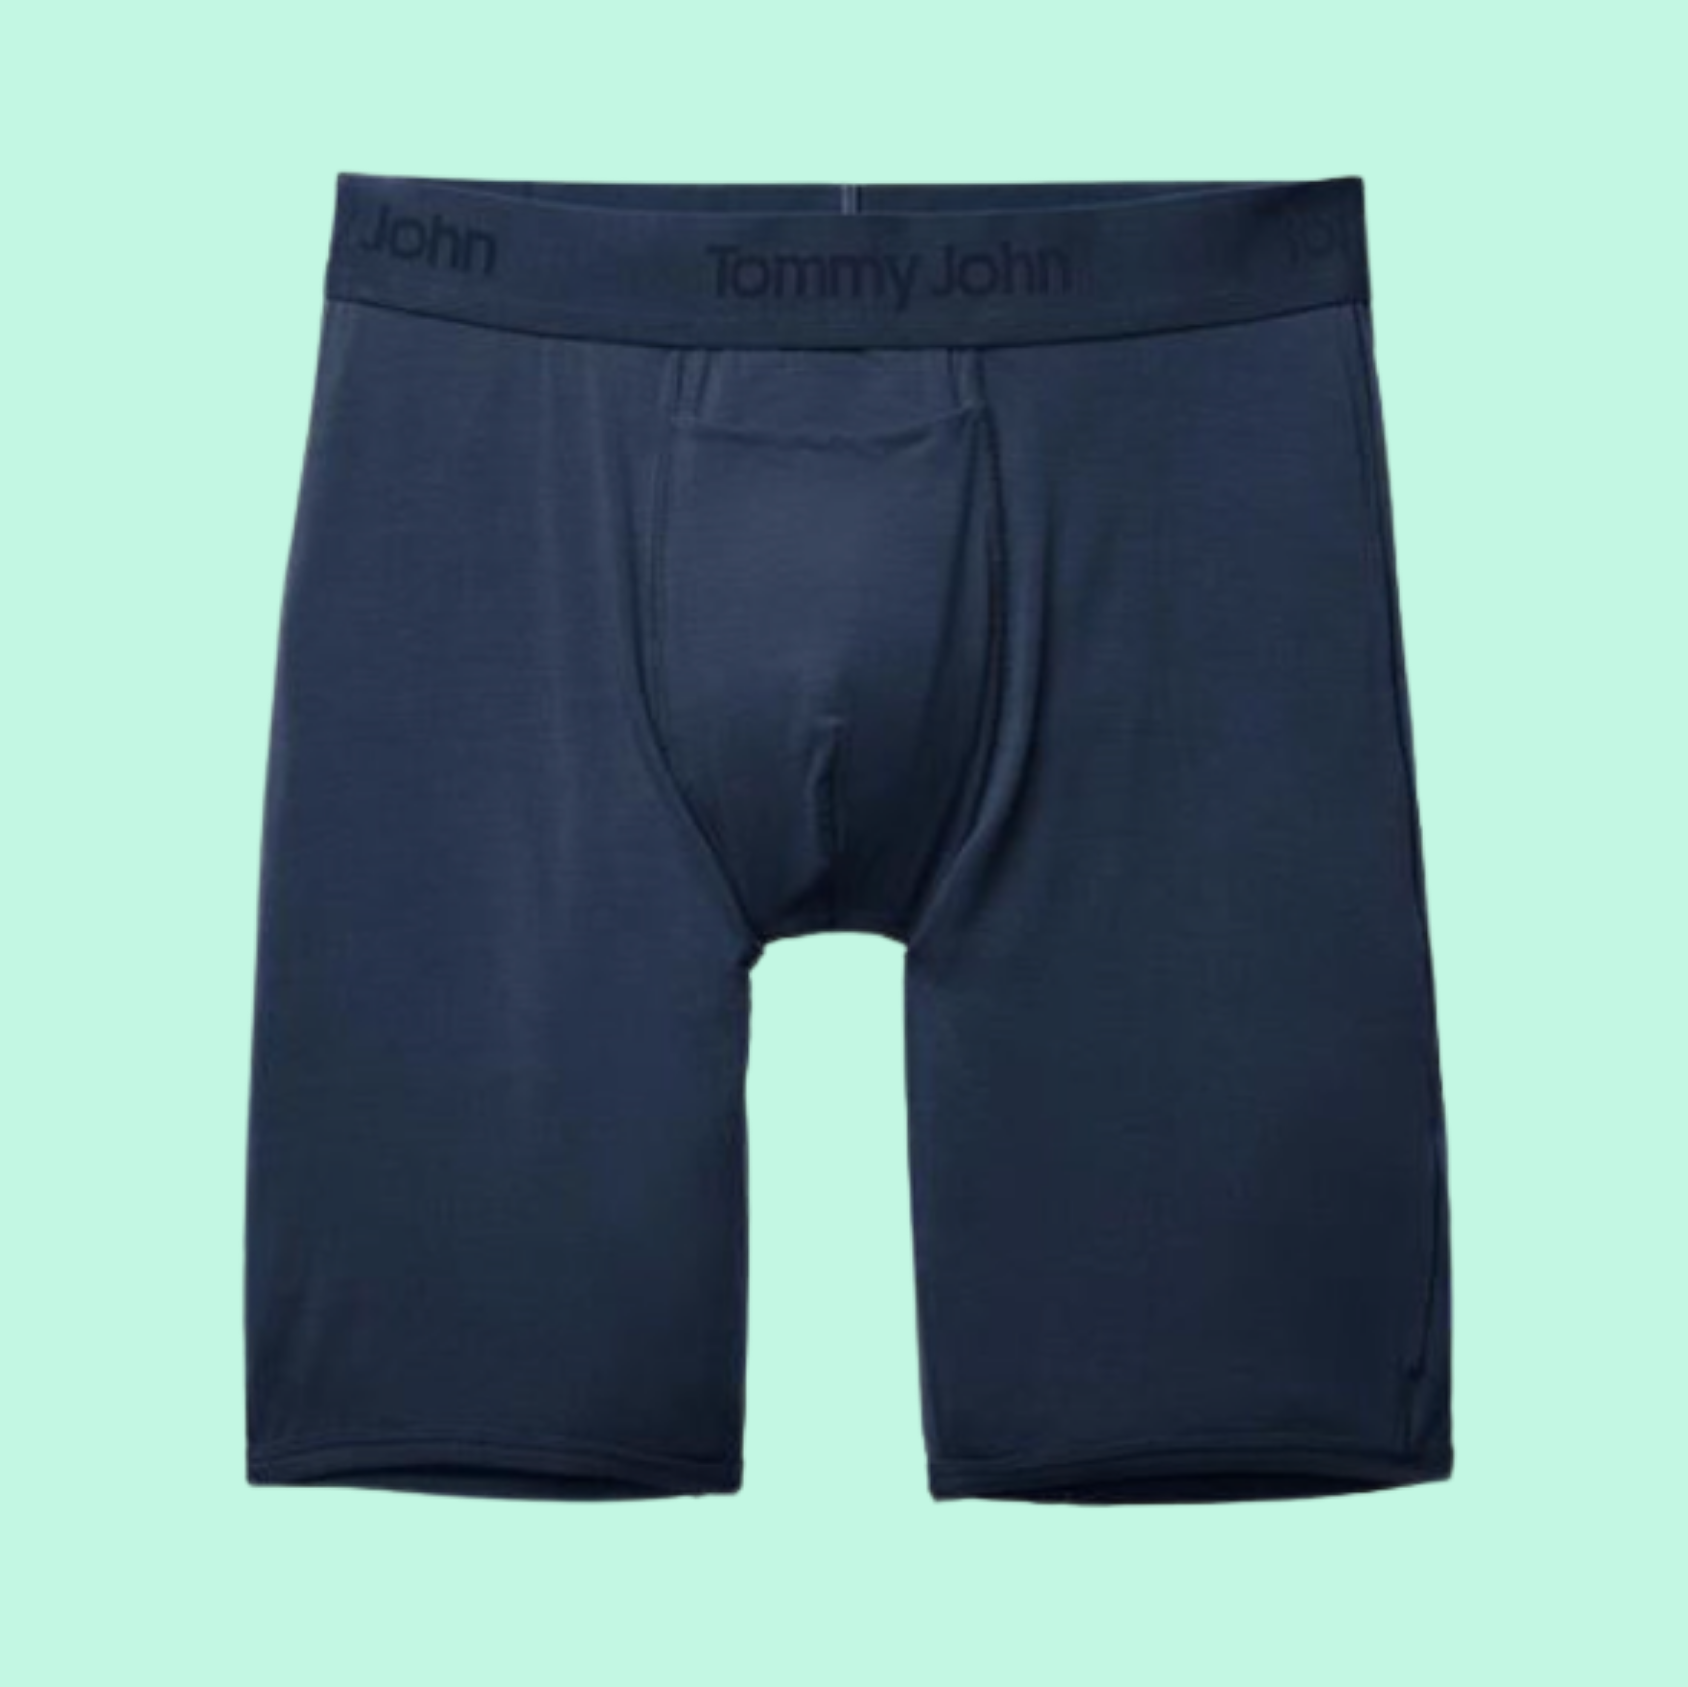 Need new underwear? Save 20% on Tommy John boxers, loungewear with our ...